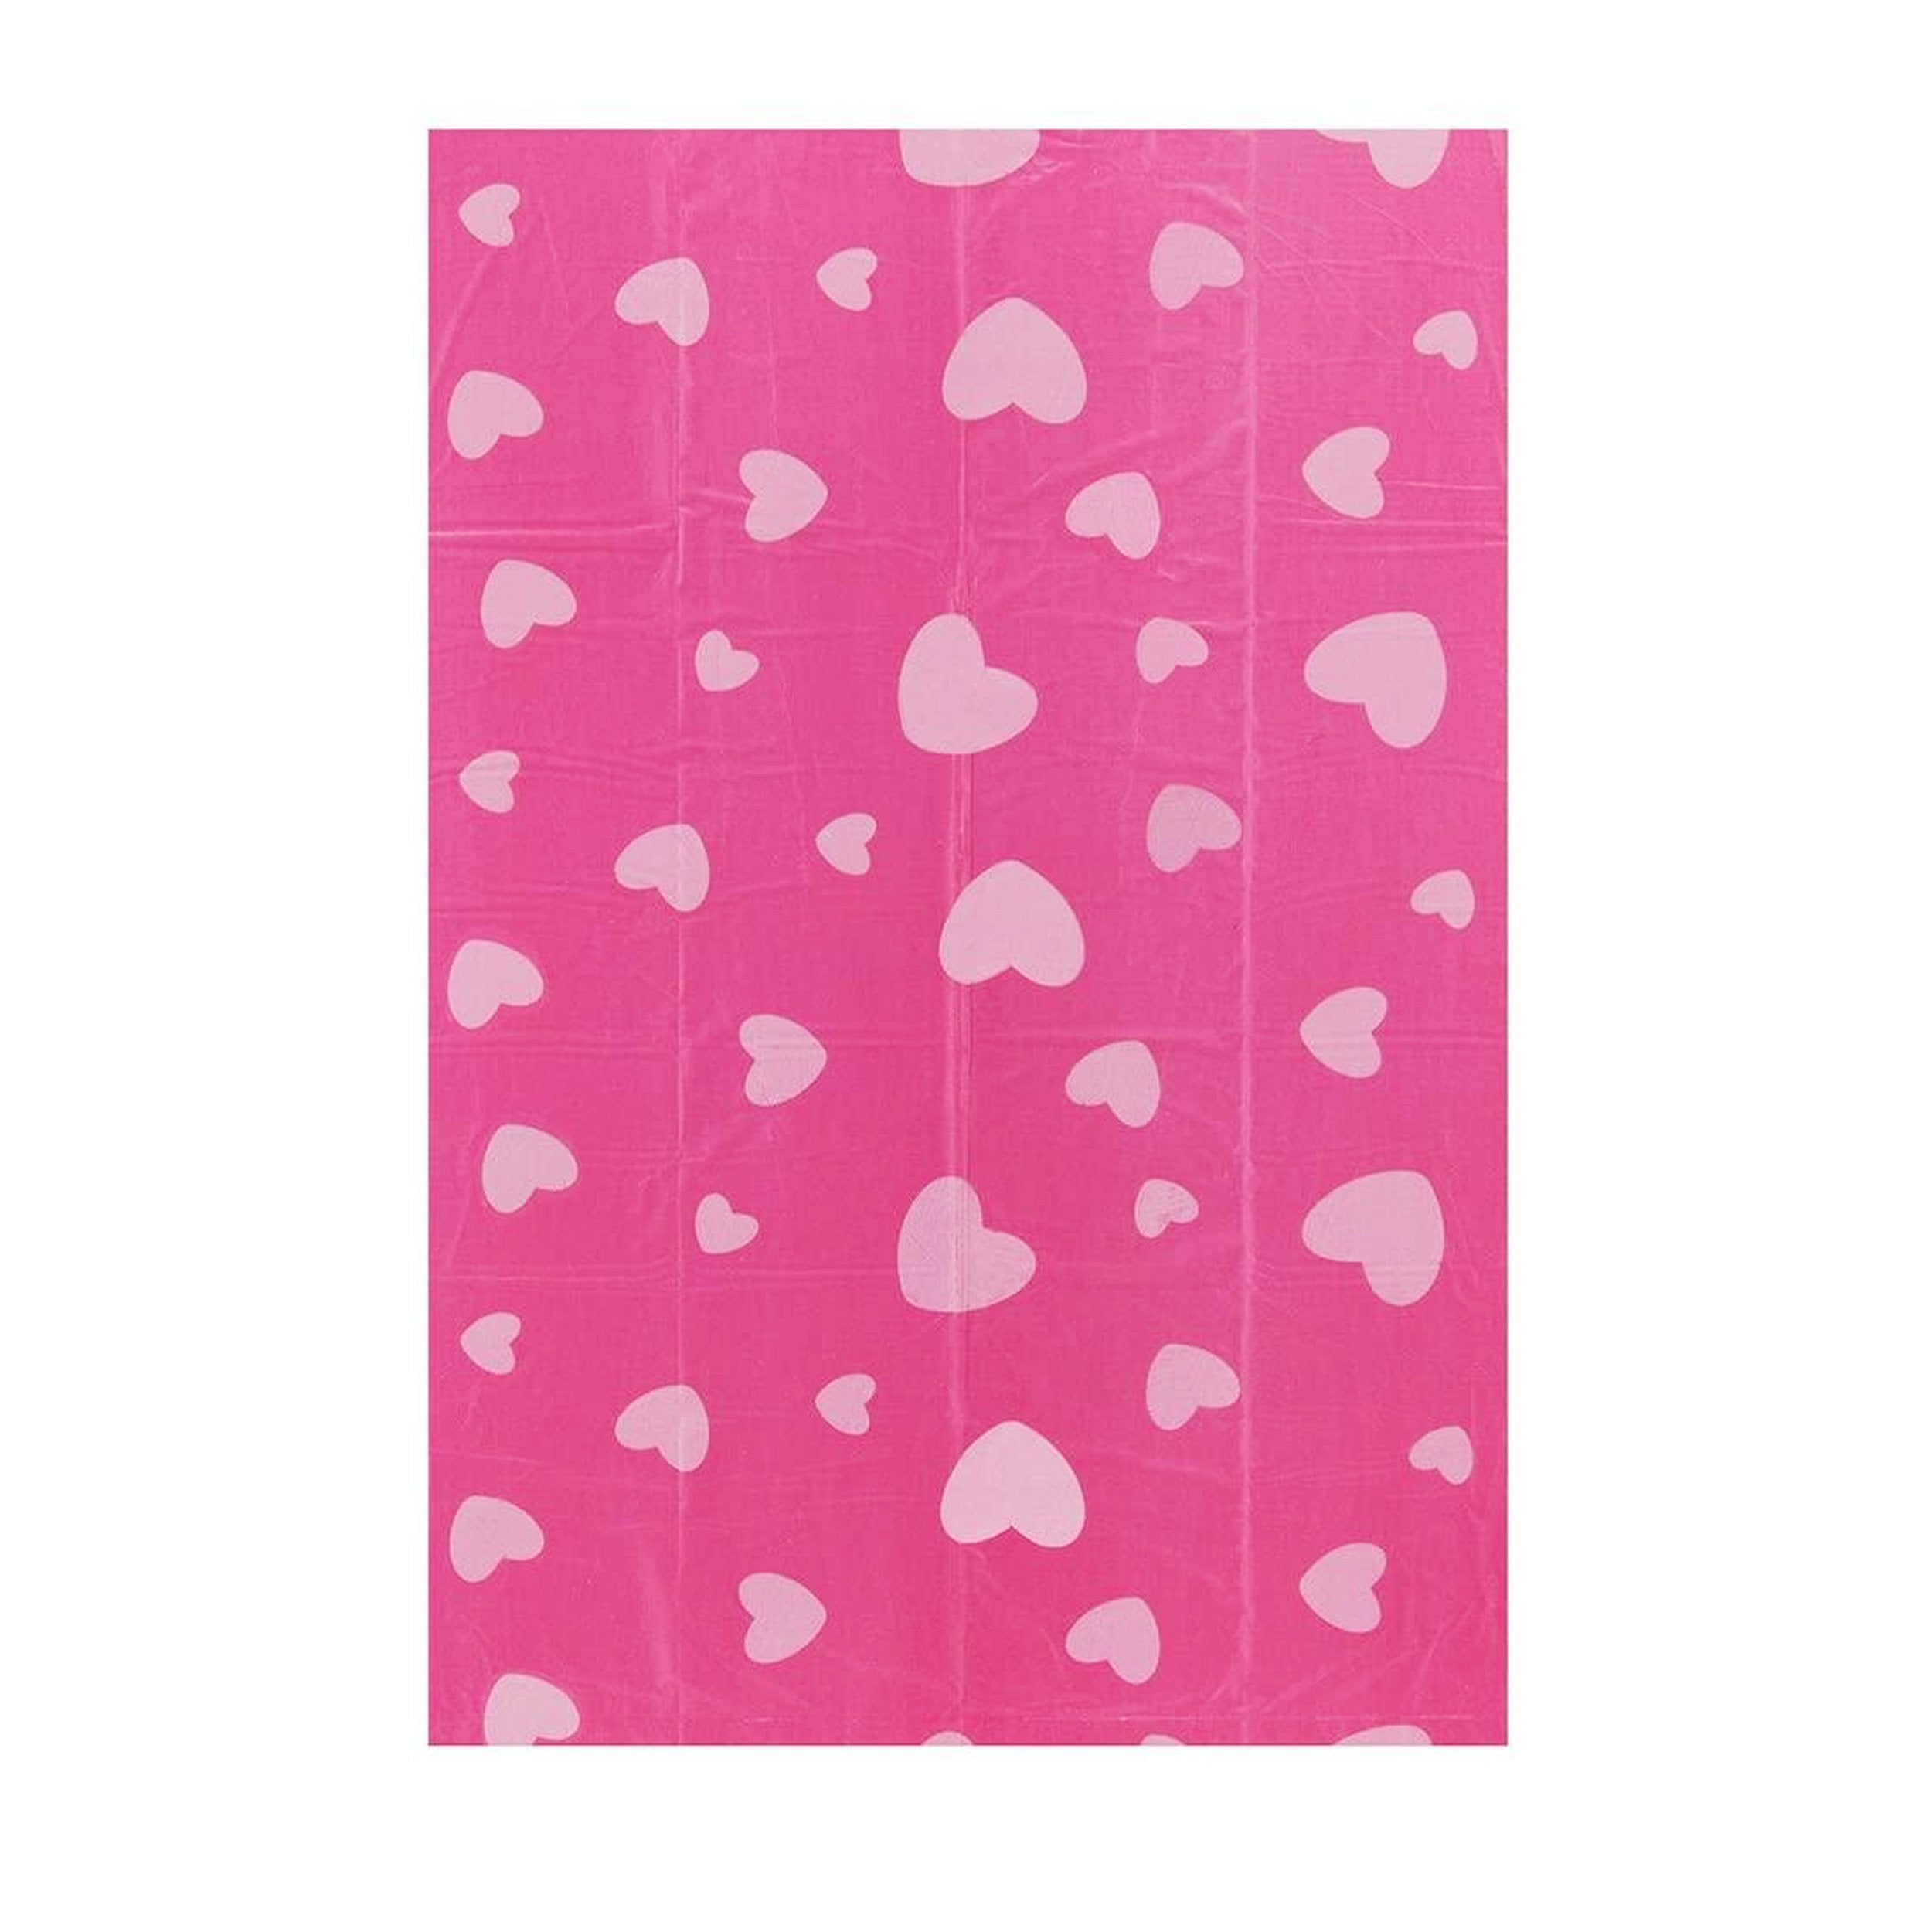 Best Pet Supplies 150 Waste Bags 10 Refill Rolls  New and Improved Fresh Scented, Fits all standard dispensers. Pink with Pink Hearts Pattern. 